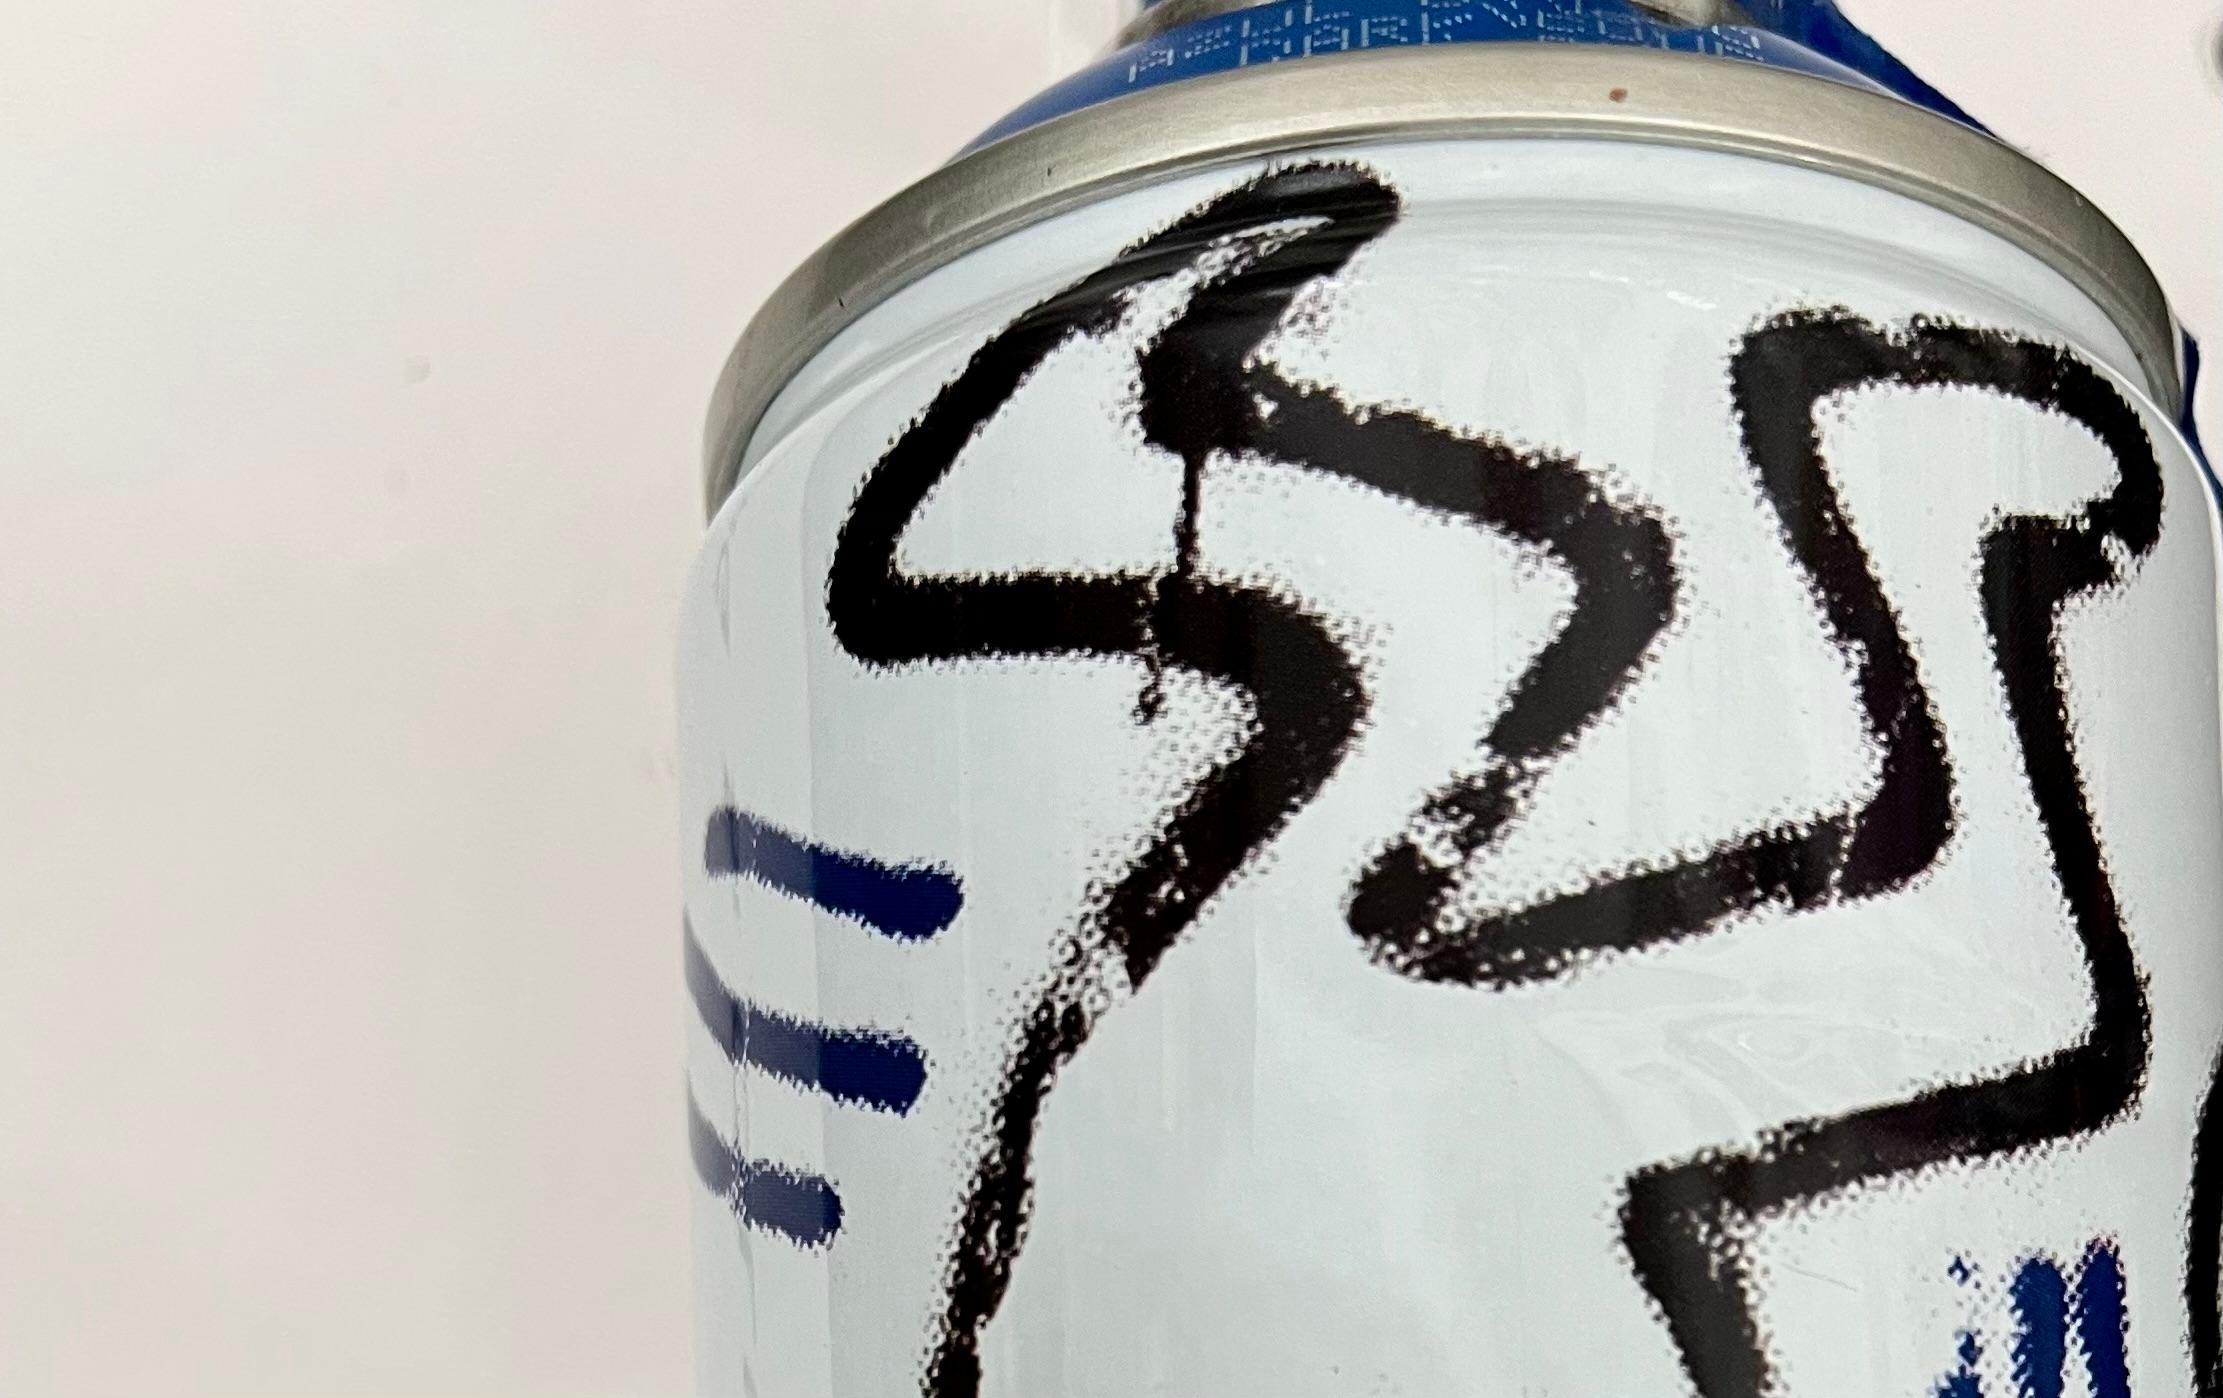 Limited edition Keith Haring spray paint can (set of 2) For Sale 1